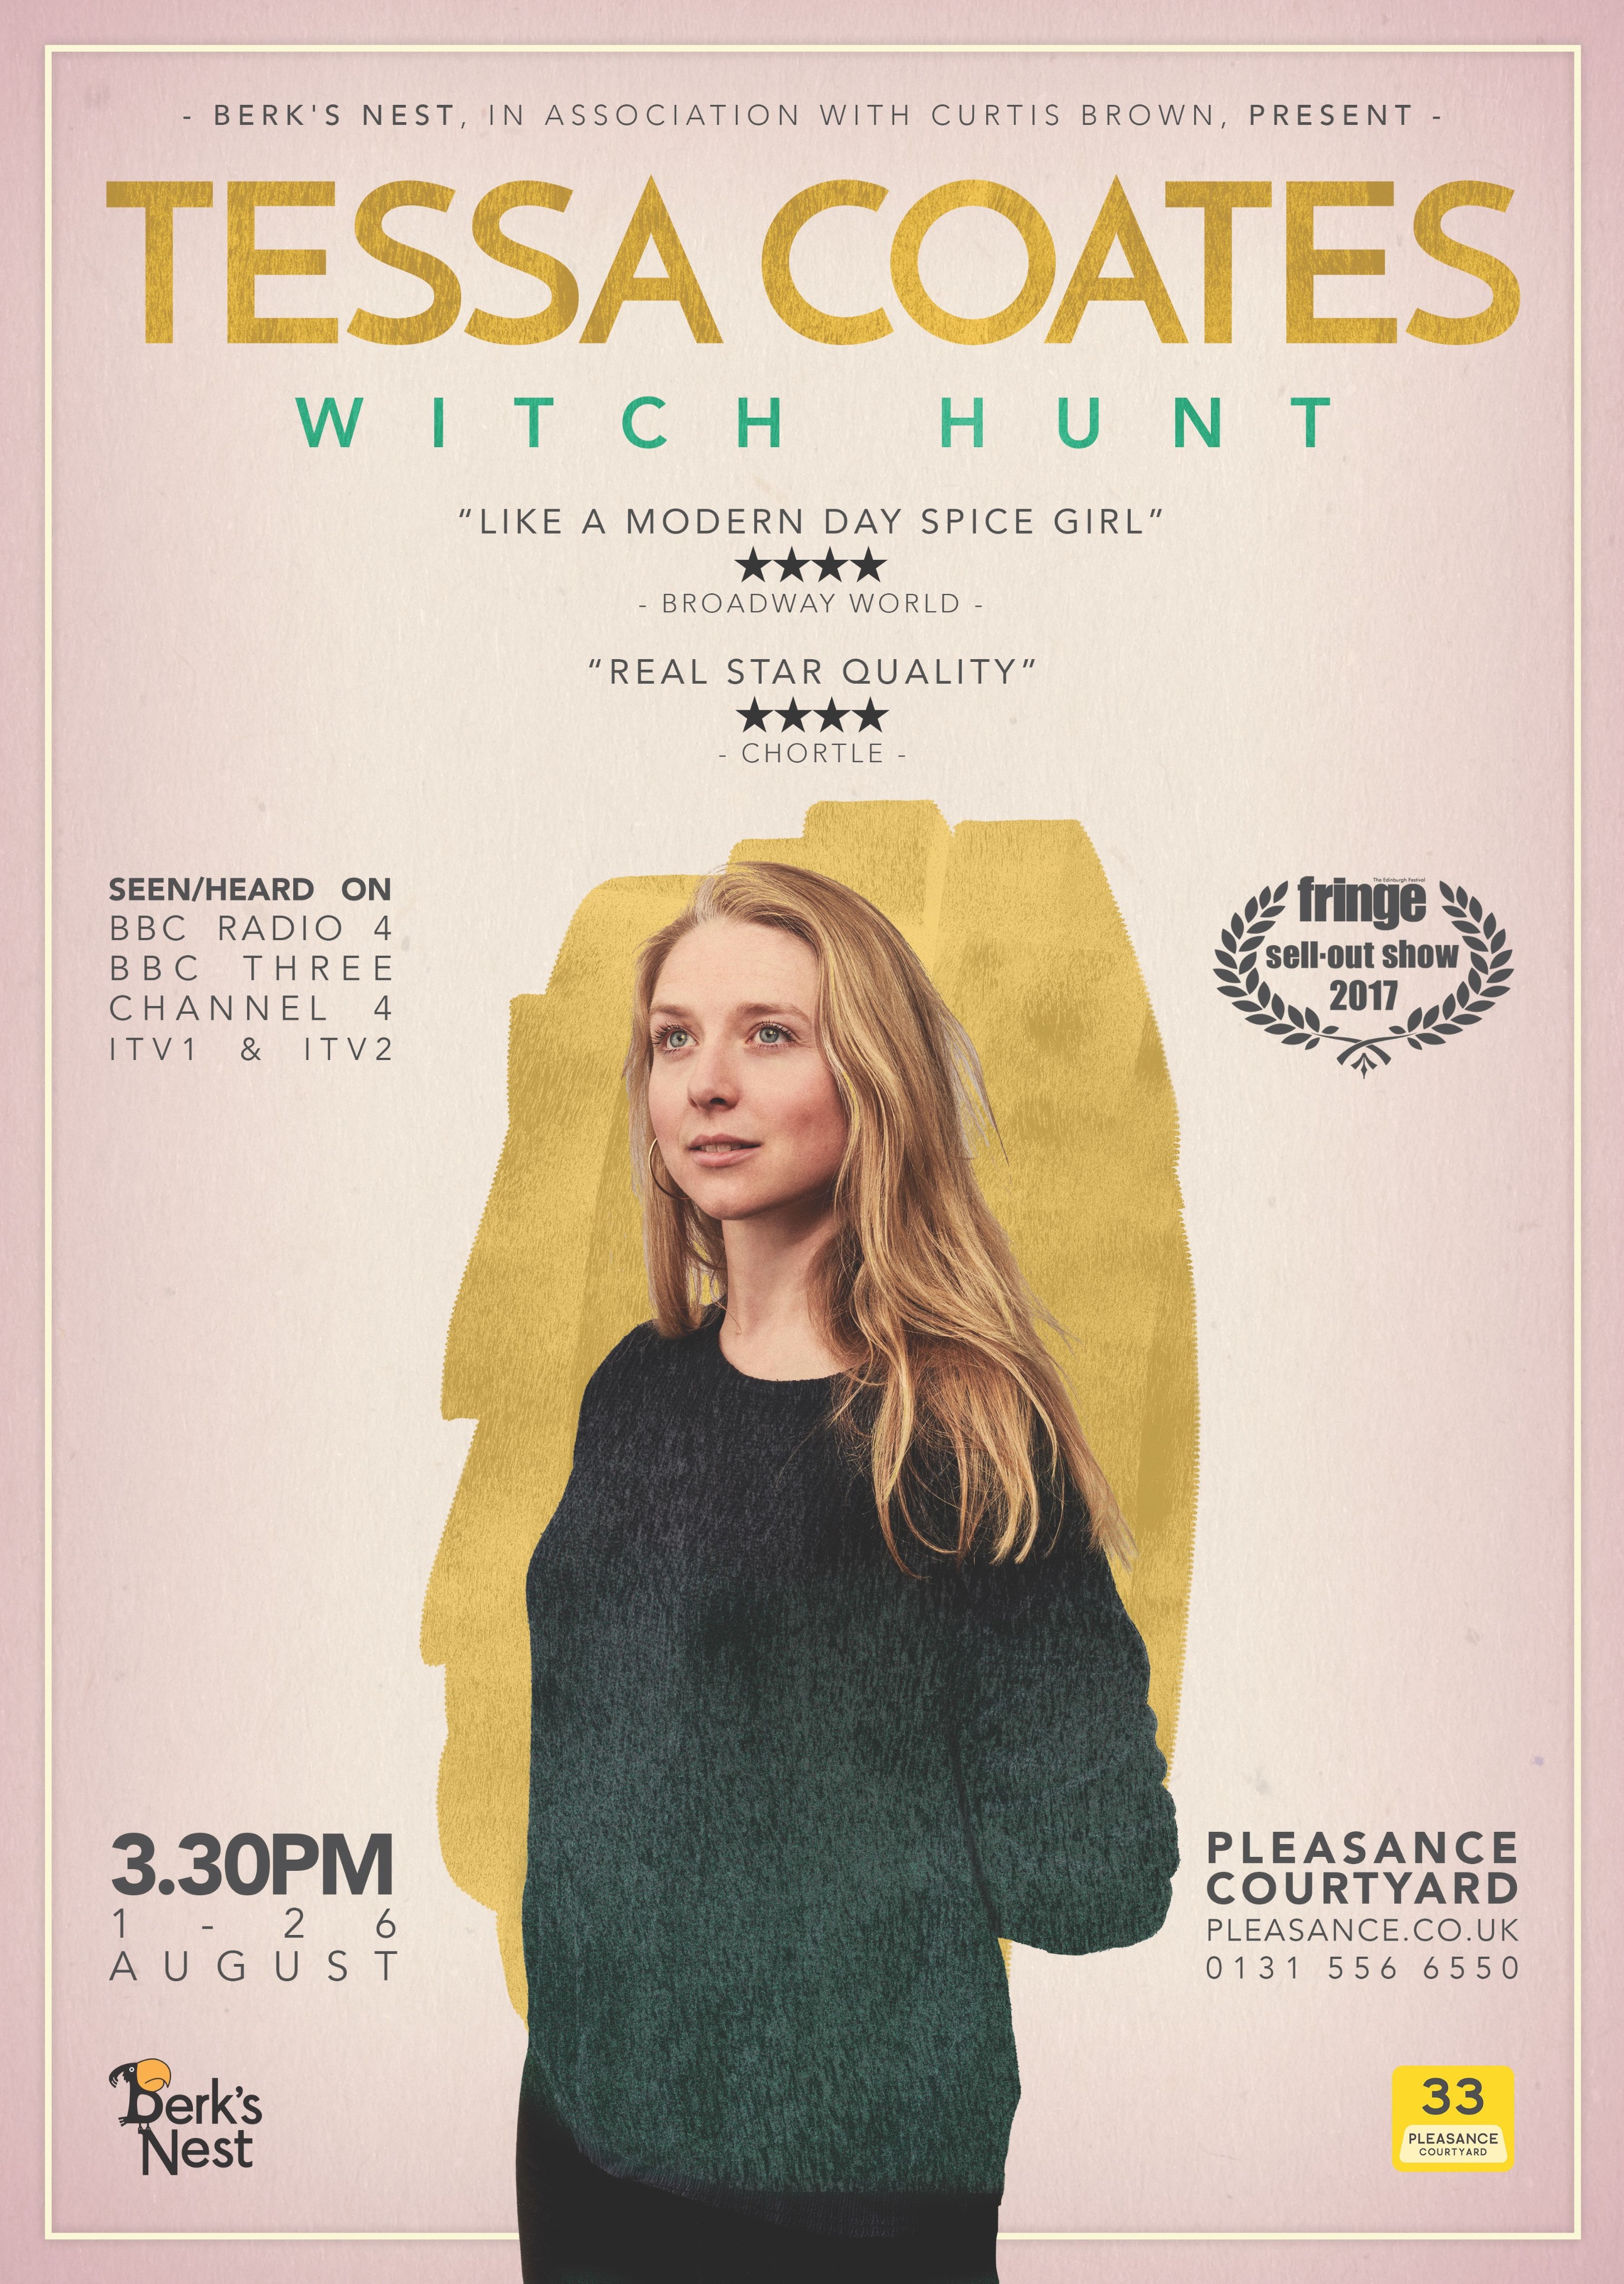 The poster for Tessa Coates: Witch Hunt